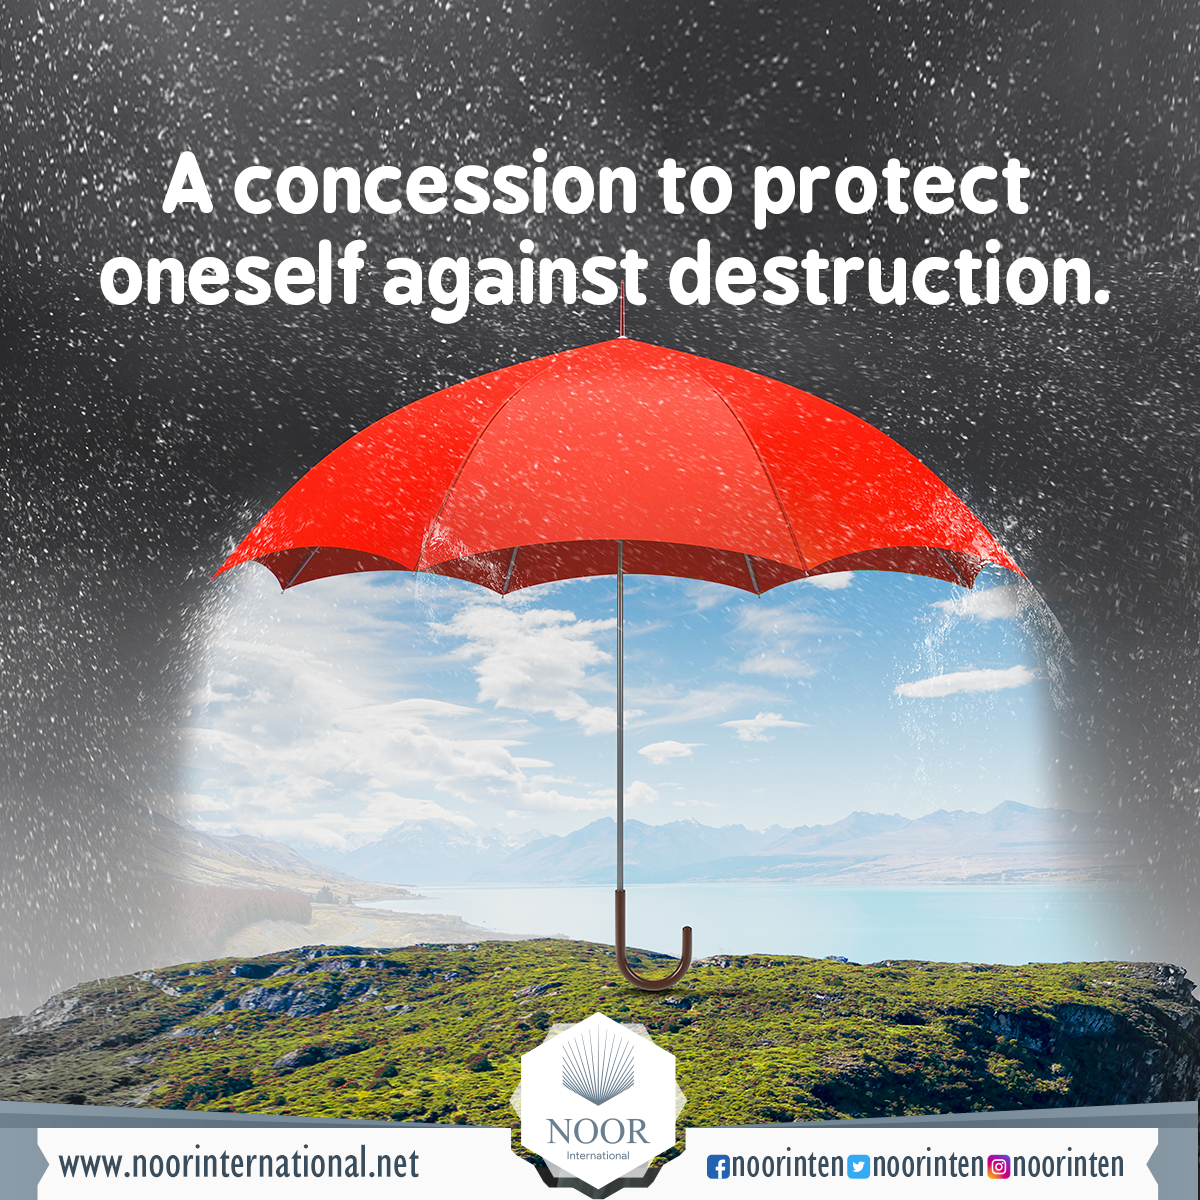 A concession to protect oneself against destruction.